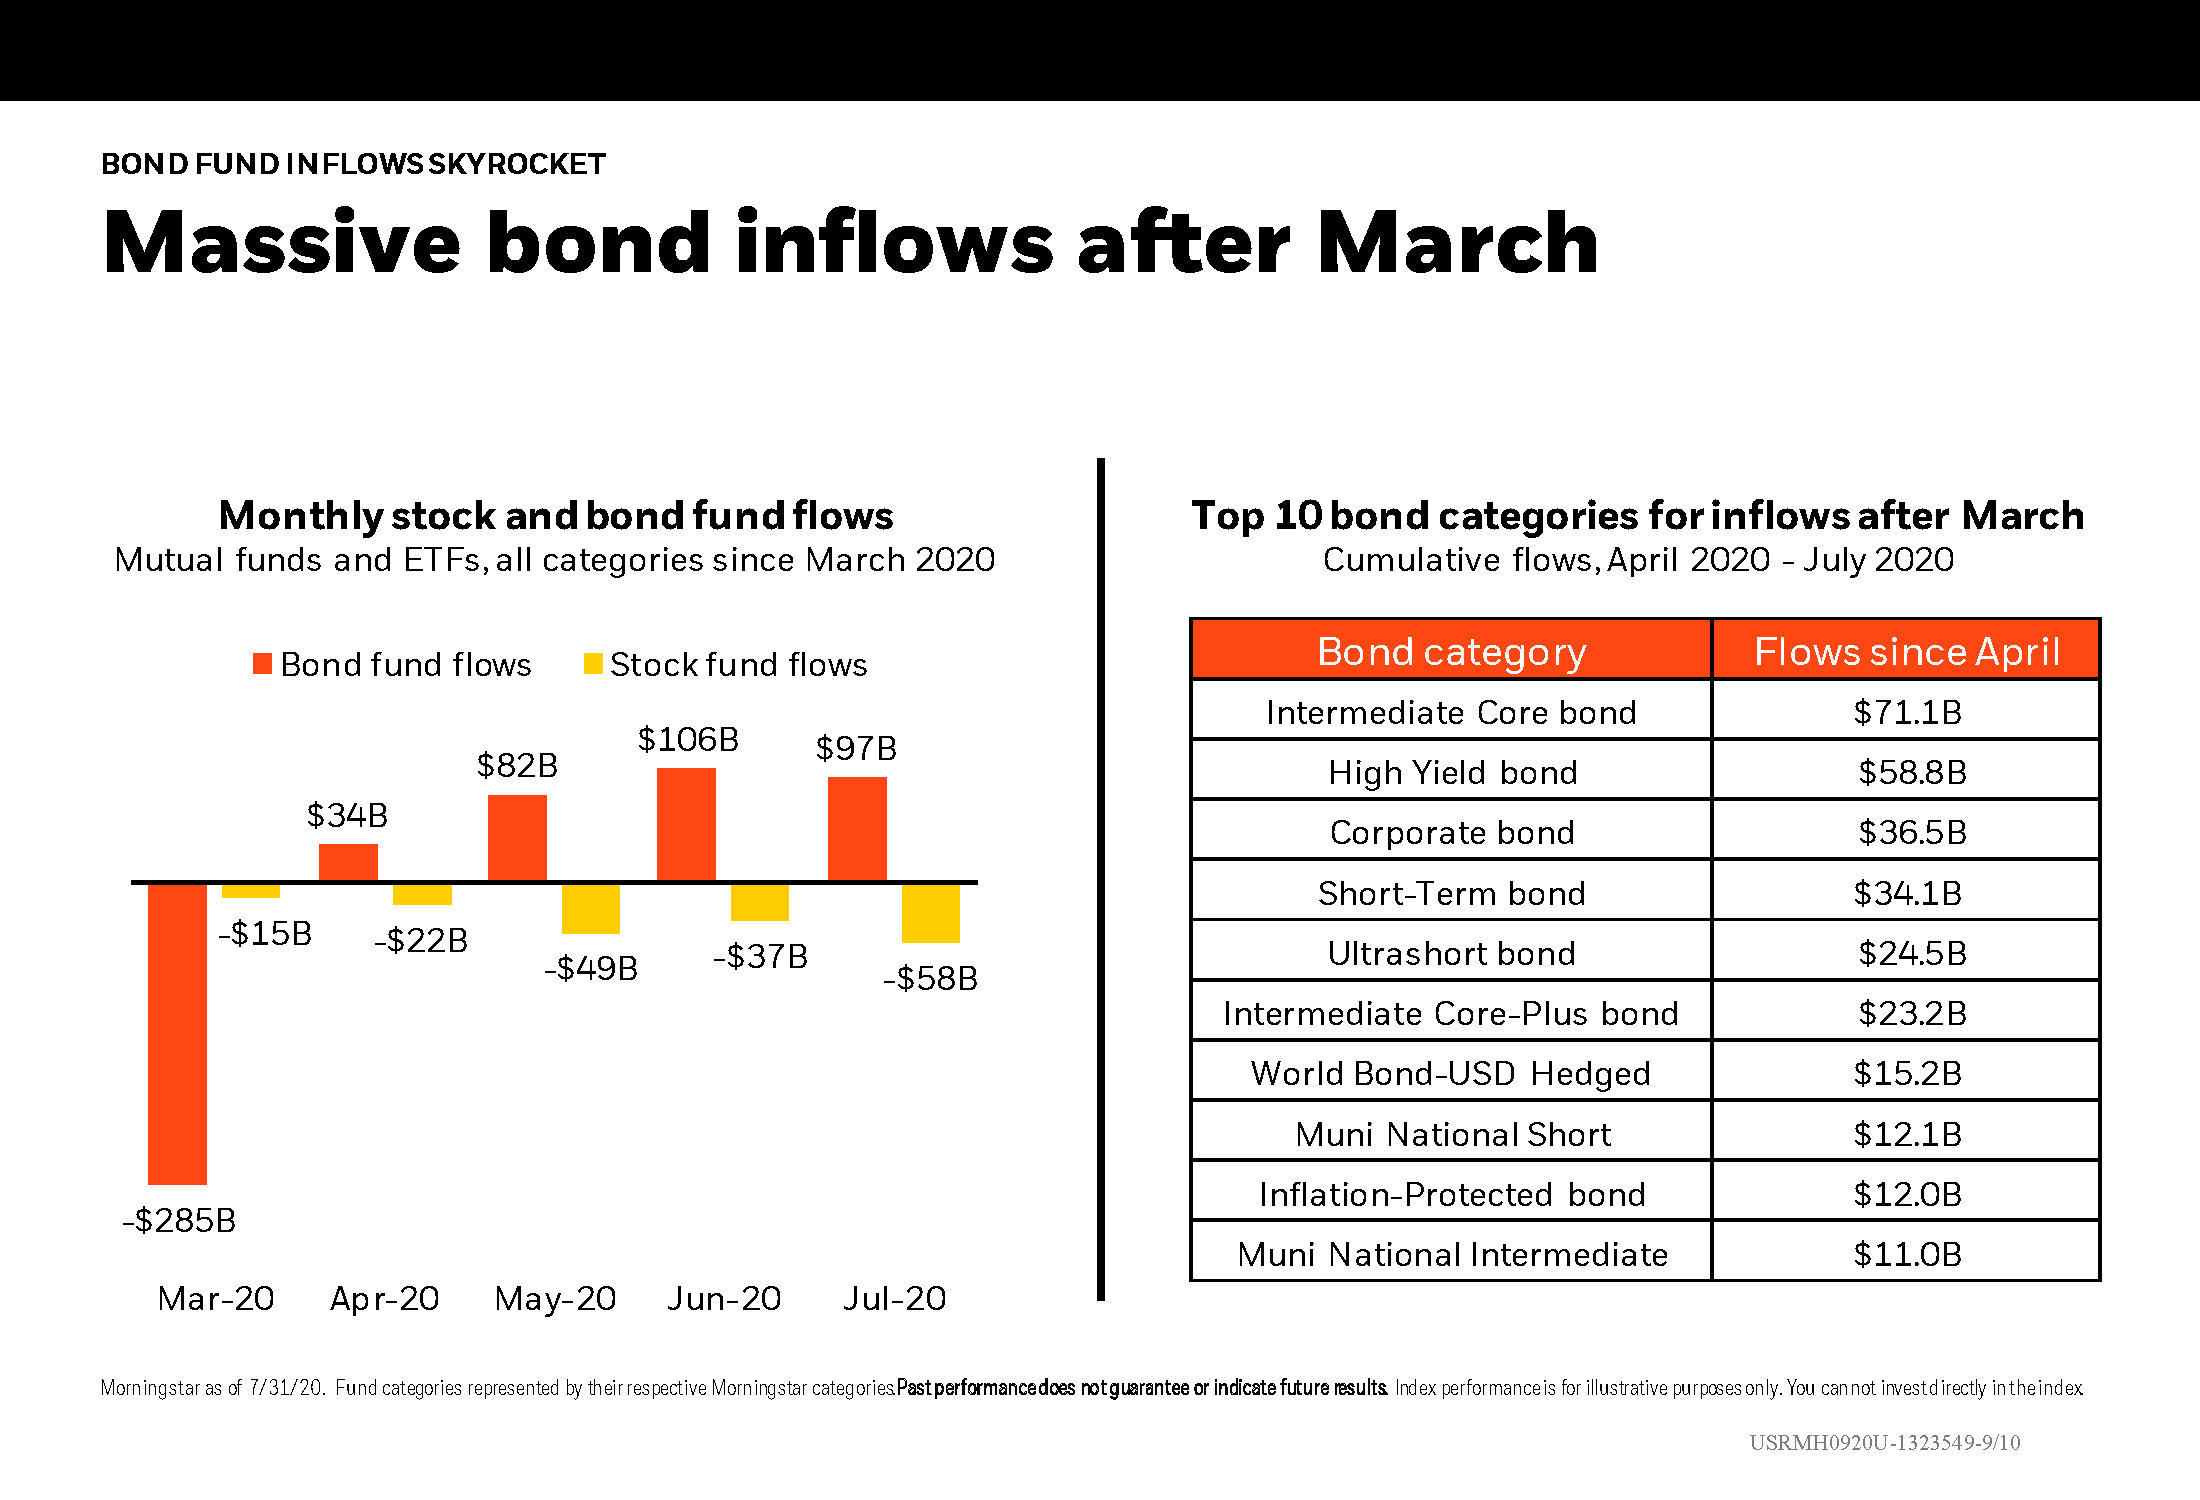 Massive bond inflows after March